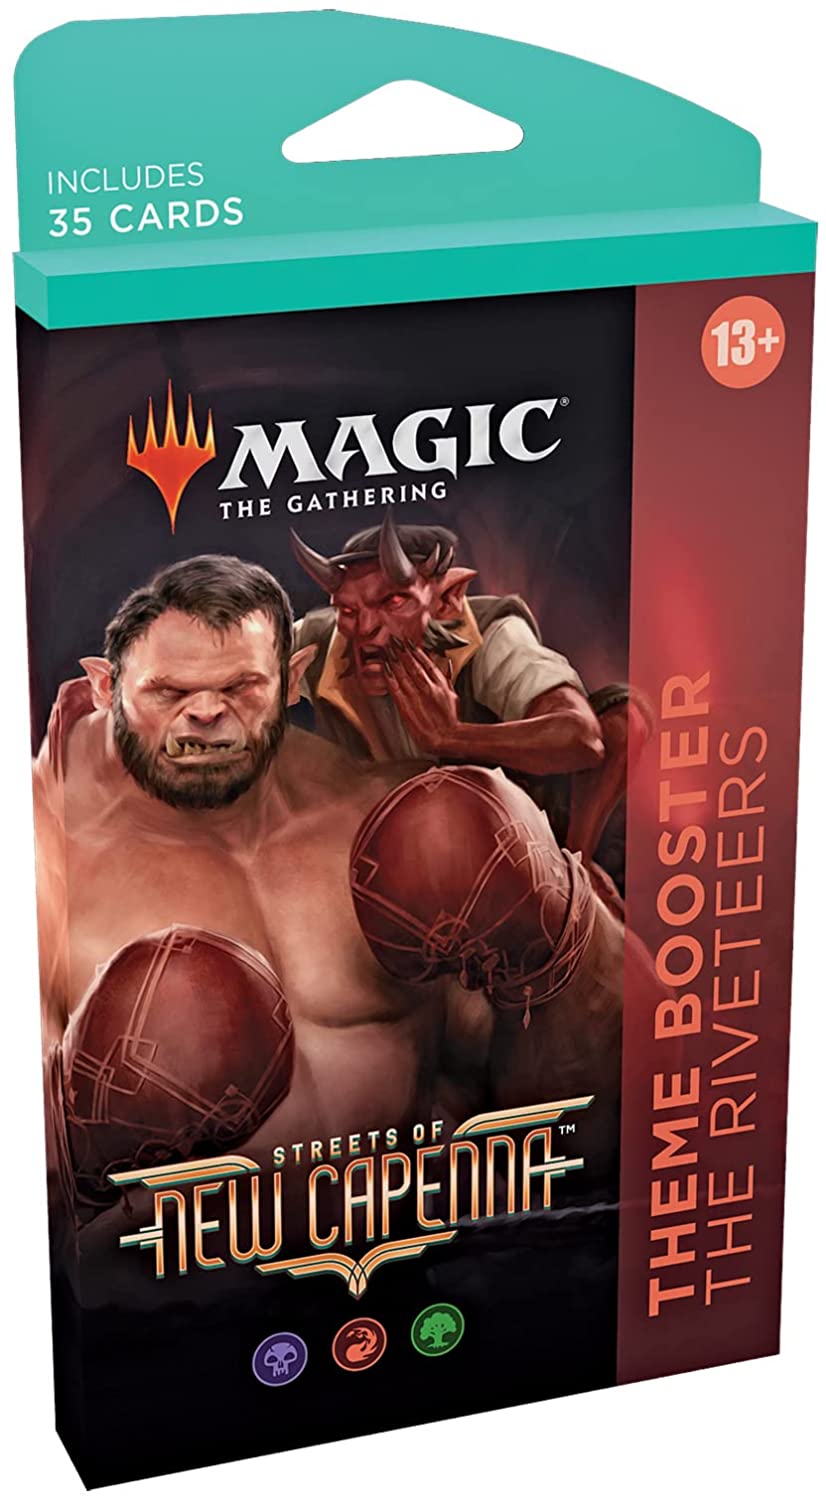 Magic: The Gathering Theme Booster Pack - Streets of New Capenna - Brokers (Green, White, Blue)